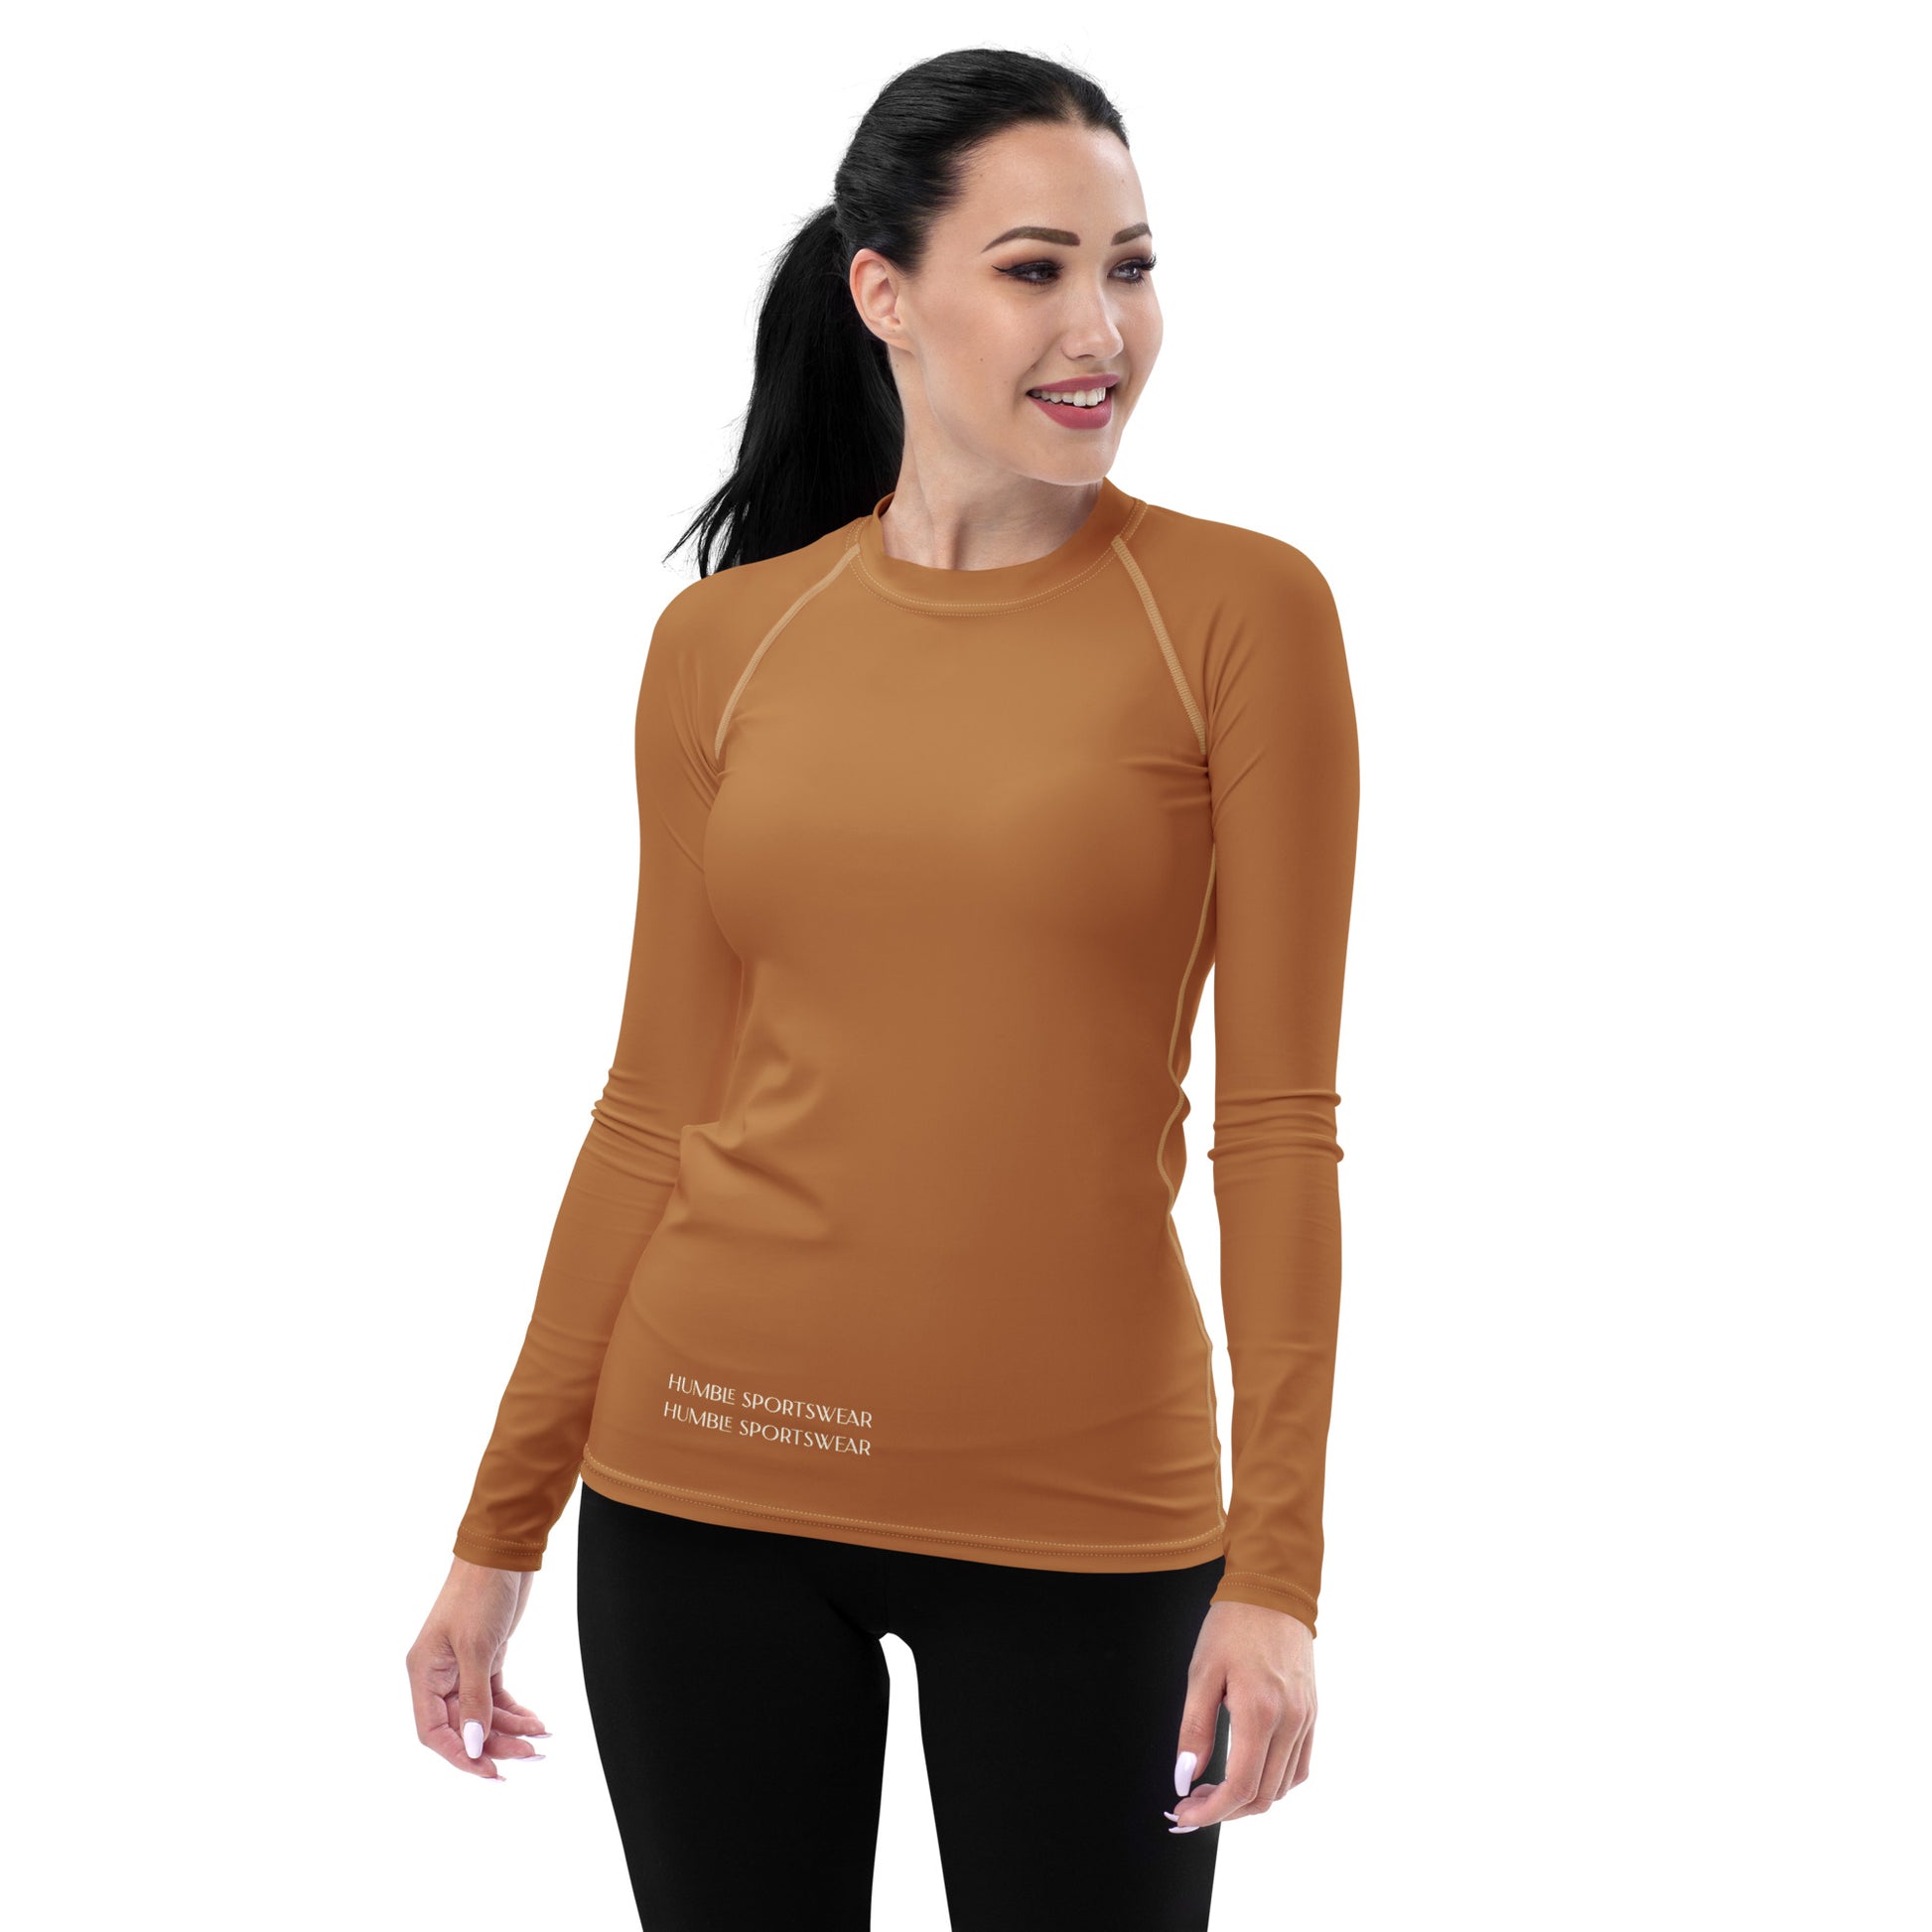 Humble Sportswear, color match tops, womenswear, long sleeve compression tops, long sleeve tops